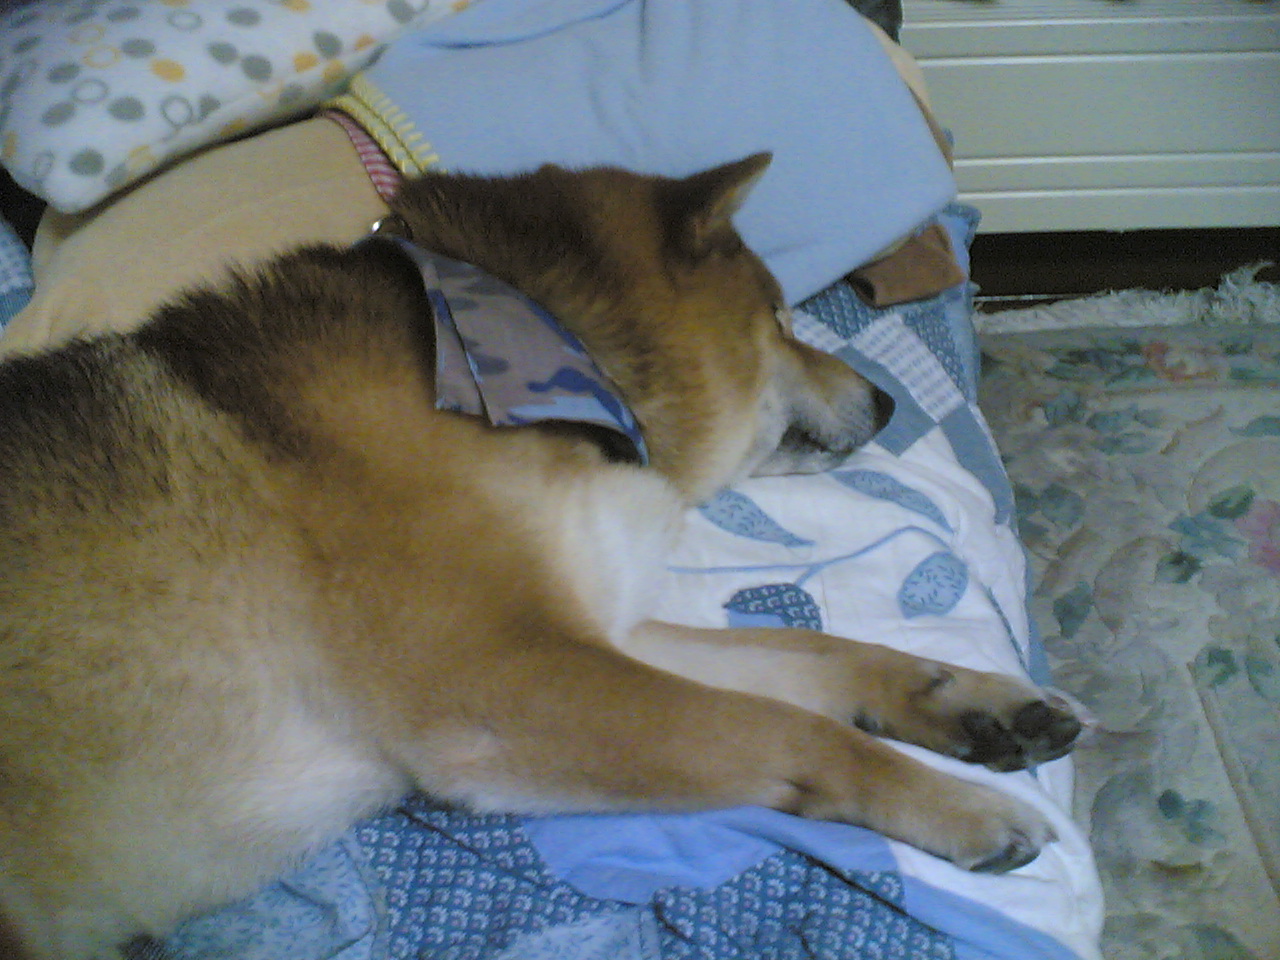 a dog sleeps on a bed with blue sheets